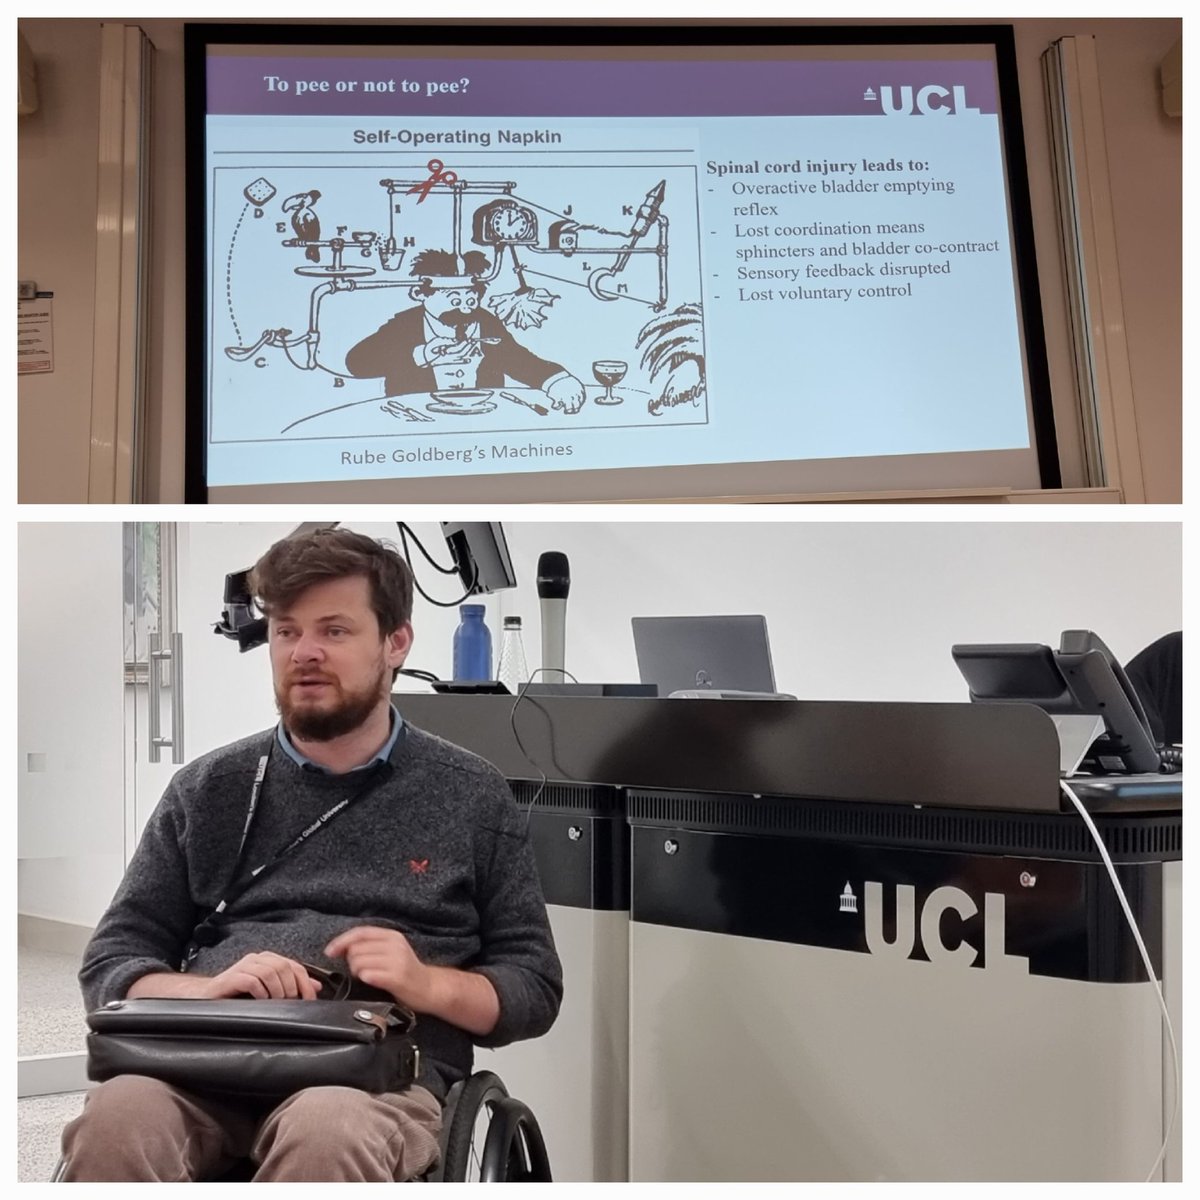 Thanks to Alumnus @DohertyonWheels for the fantastic, inspirational seminar he gave at the @UCLDivofSurgery PGR Celebration Event on 22/11. He's continuing his important PhD work tackling continence, working with both Industry and Academia. @uclmedsci @UCLmedphys @RNOHnhs